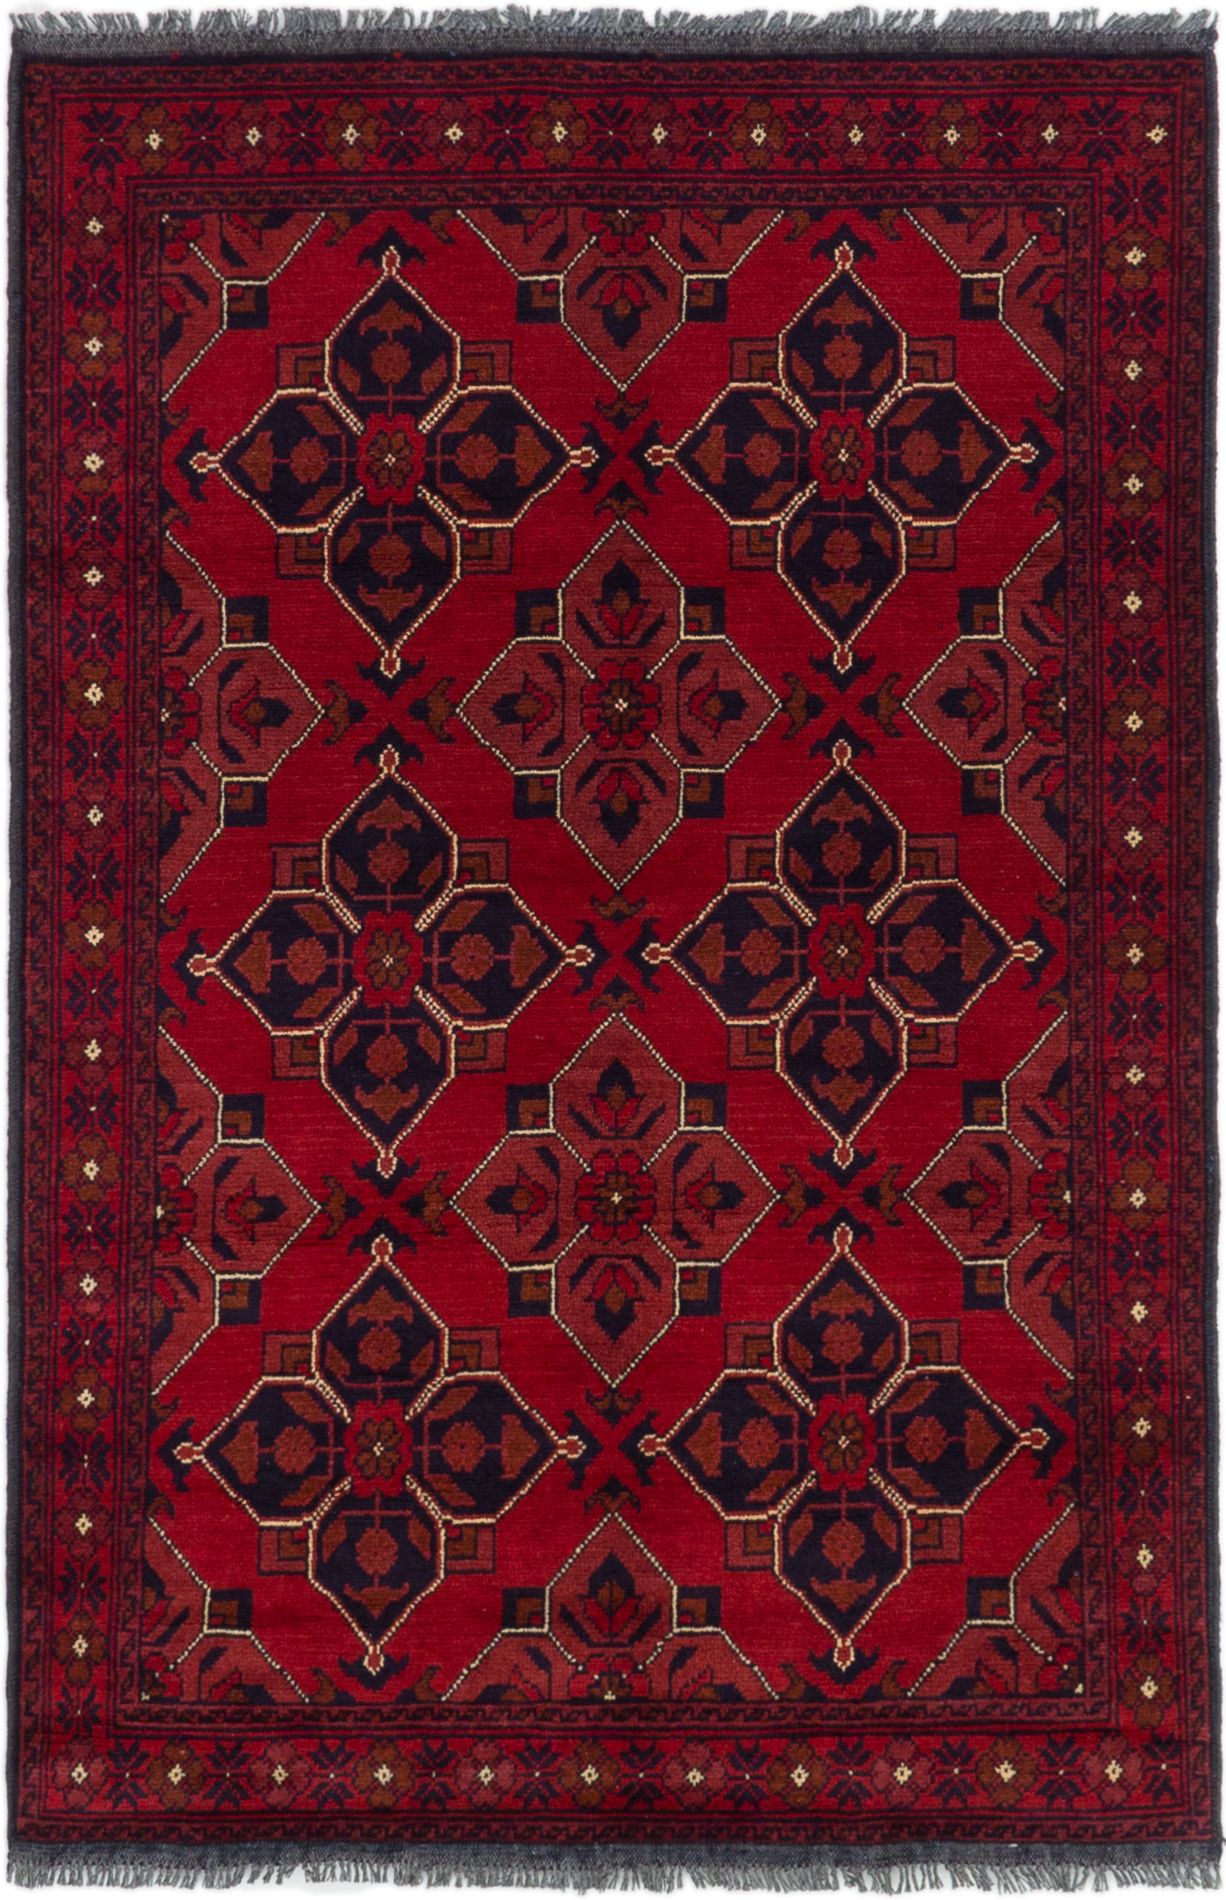 Hand-knotted Finest Khal Mohammadi Red Wool Rug 3'3" x 4'11" (37) Size: 3'3" x 4'11"  